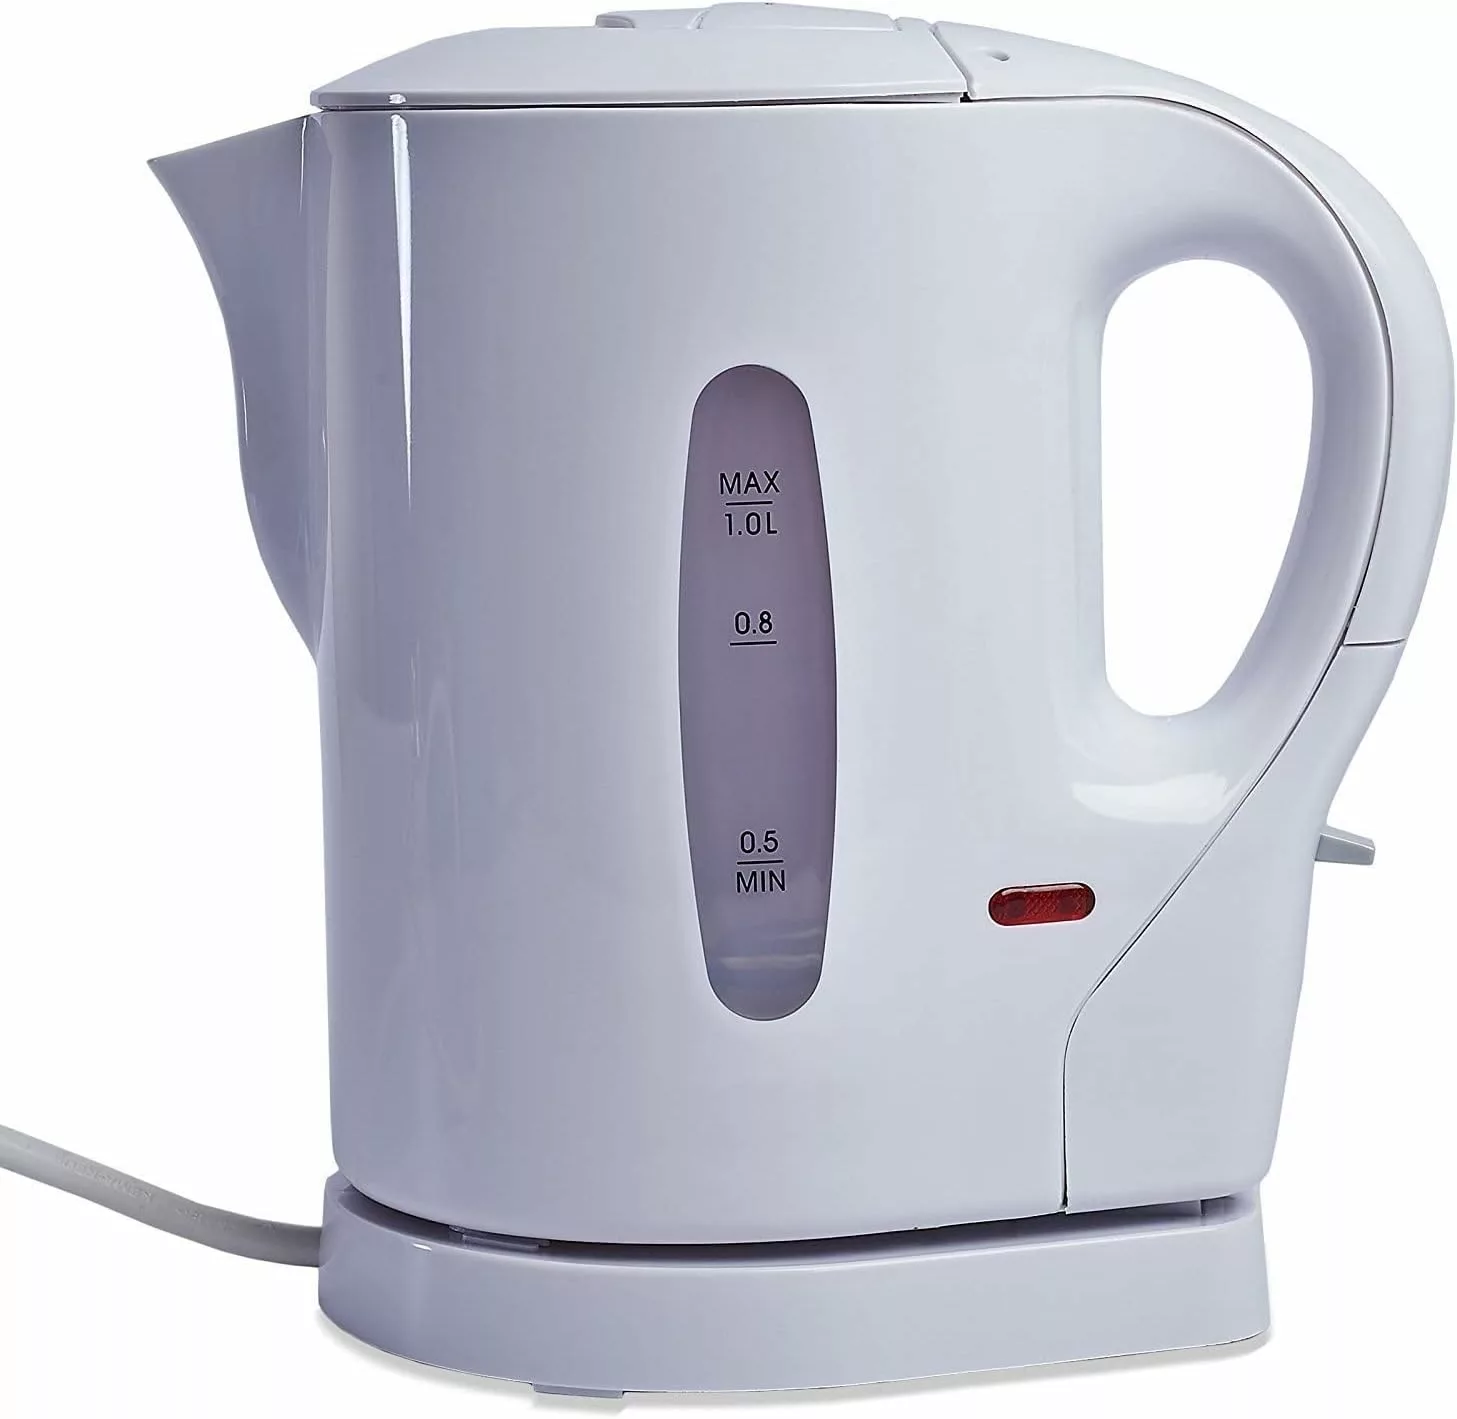 FiNeWaY 1L Electric Kettle Caravan Travel Hot Water Jug - Overheat Thermostat - 900w - [Energy Class A] (White)